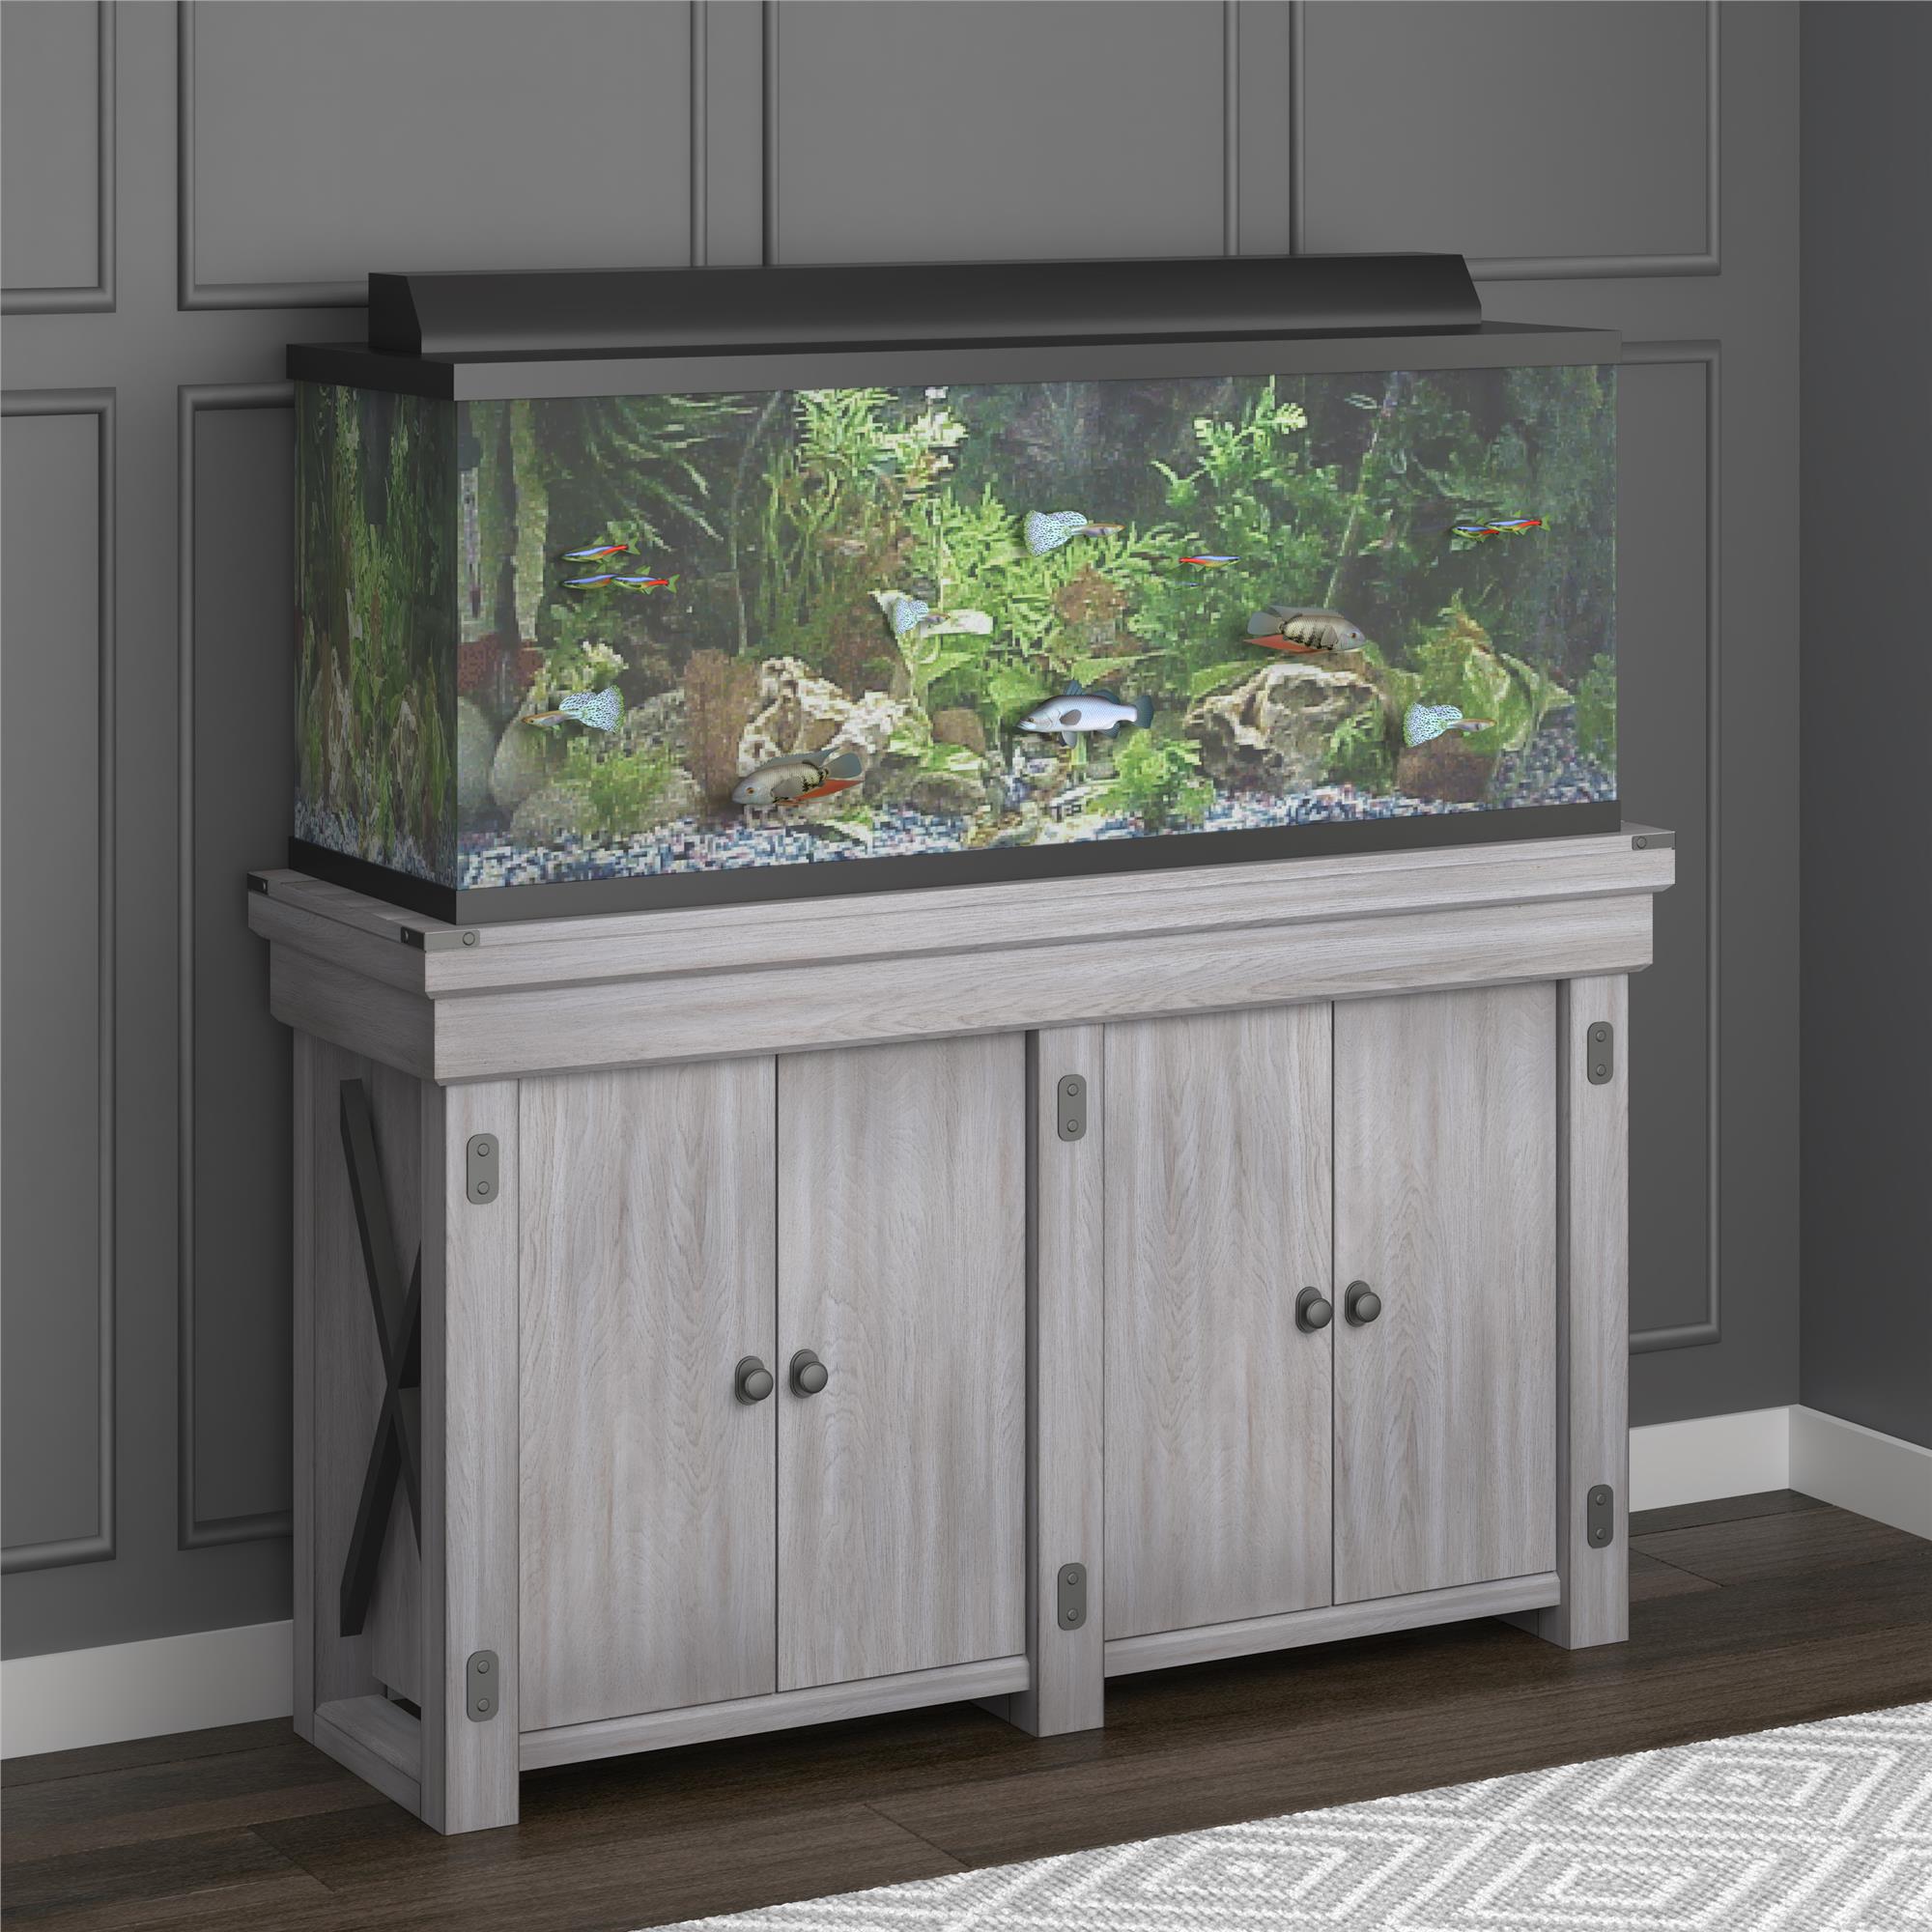 Flipper by Ollie & Hutch Wildwood 55 Gallon Aquarium Stand, Rustic White - image 2 of 14